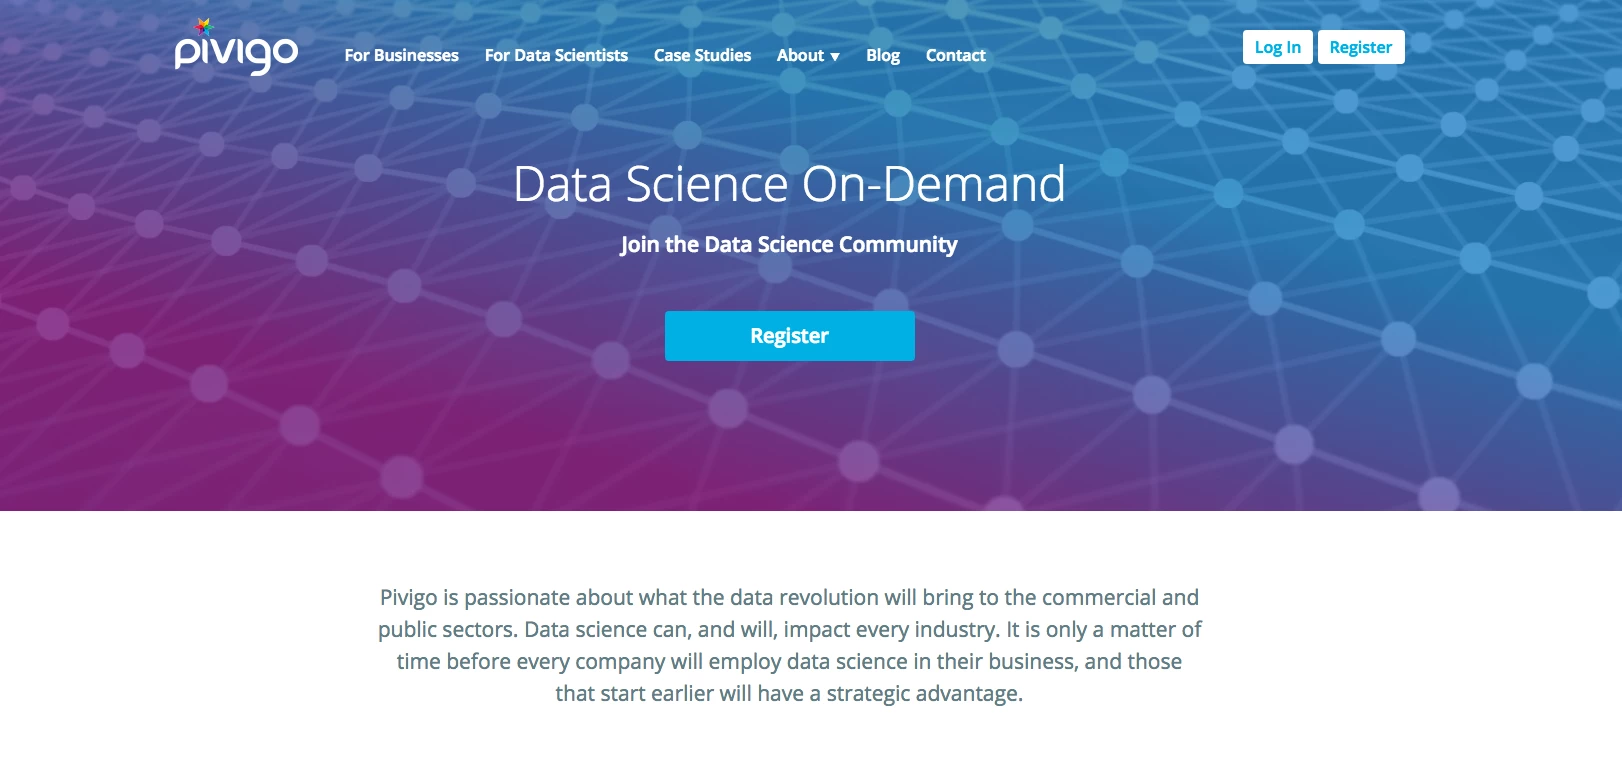 Pivigo has launched Europe's first on-demand marketplace for data scientists.